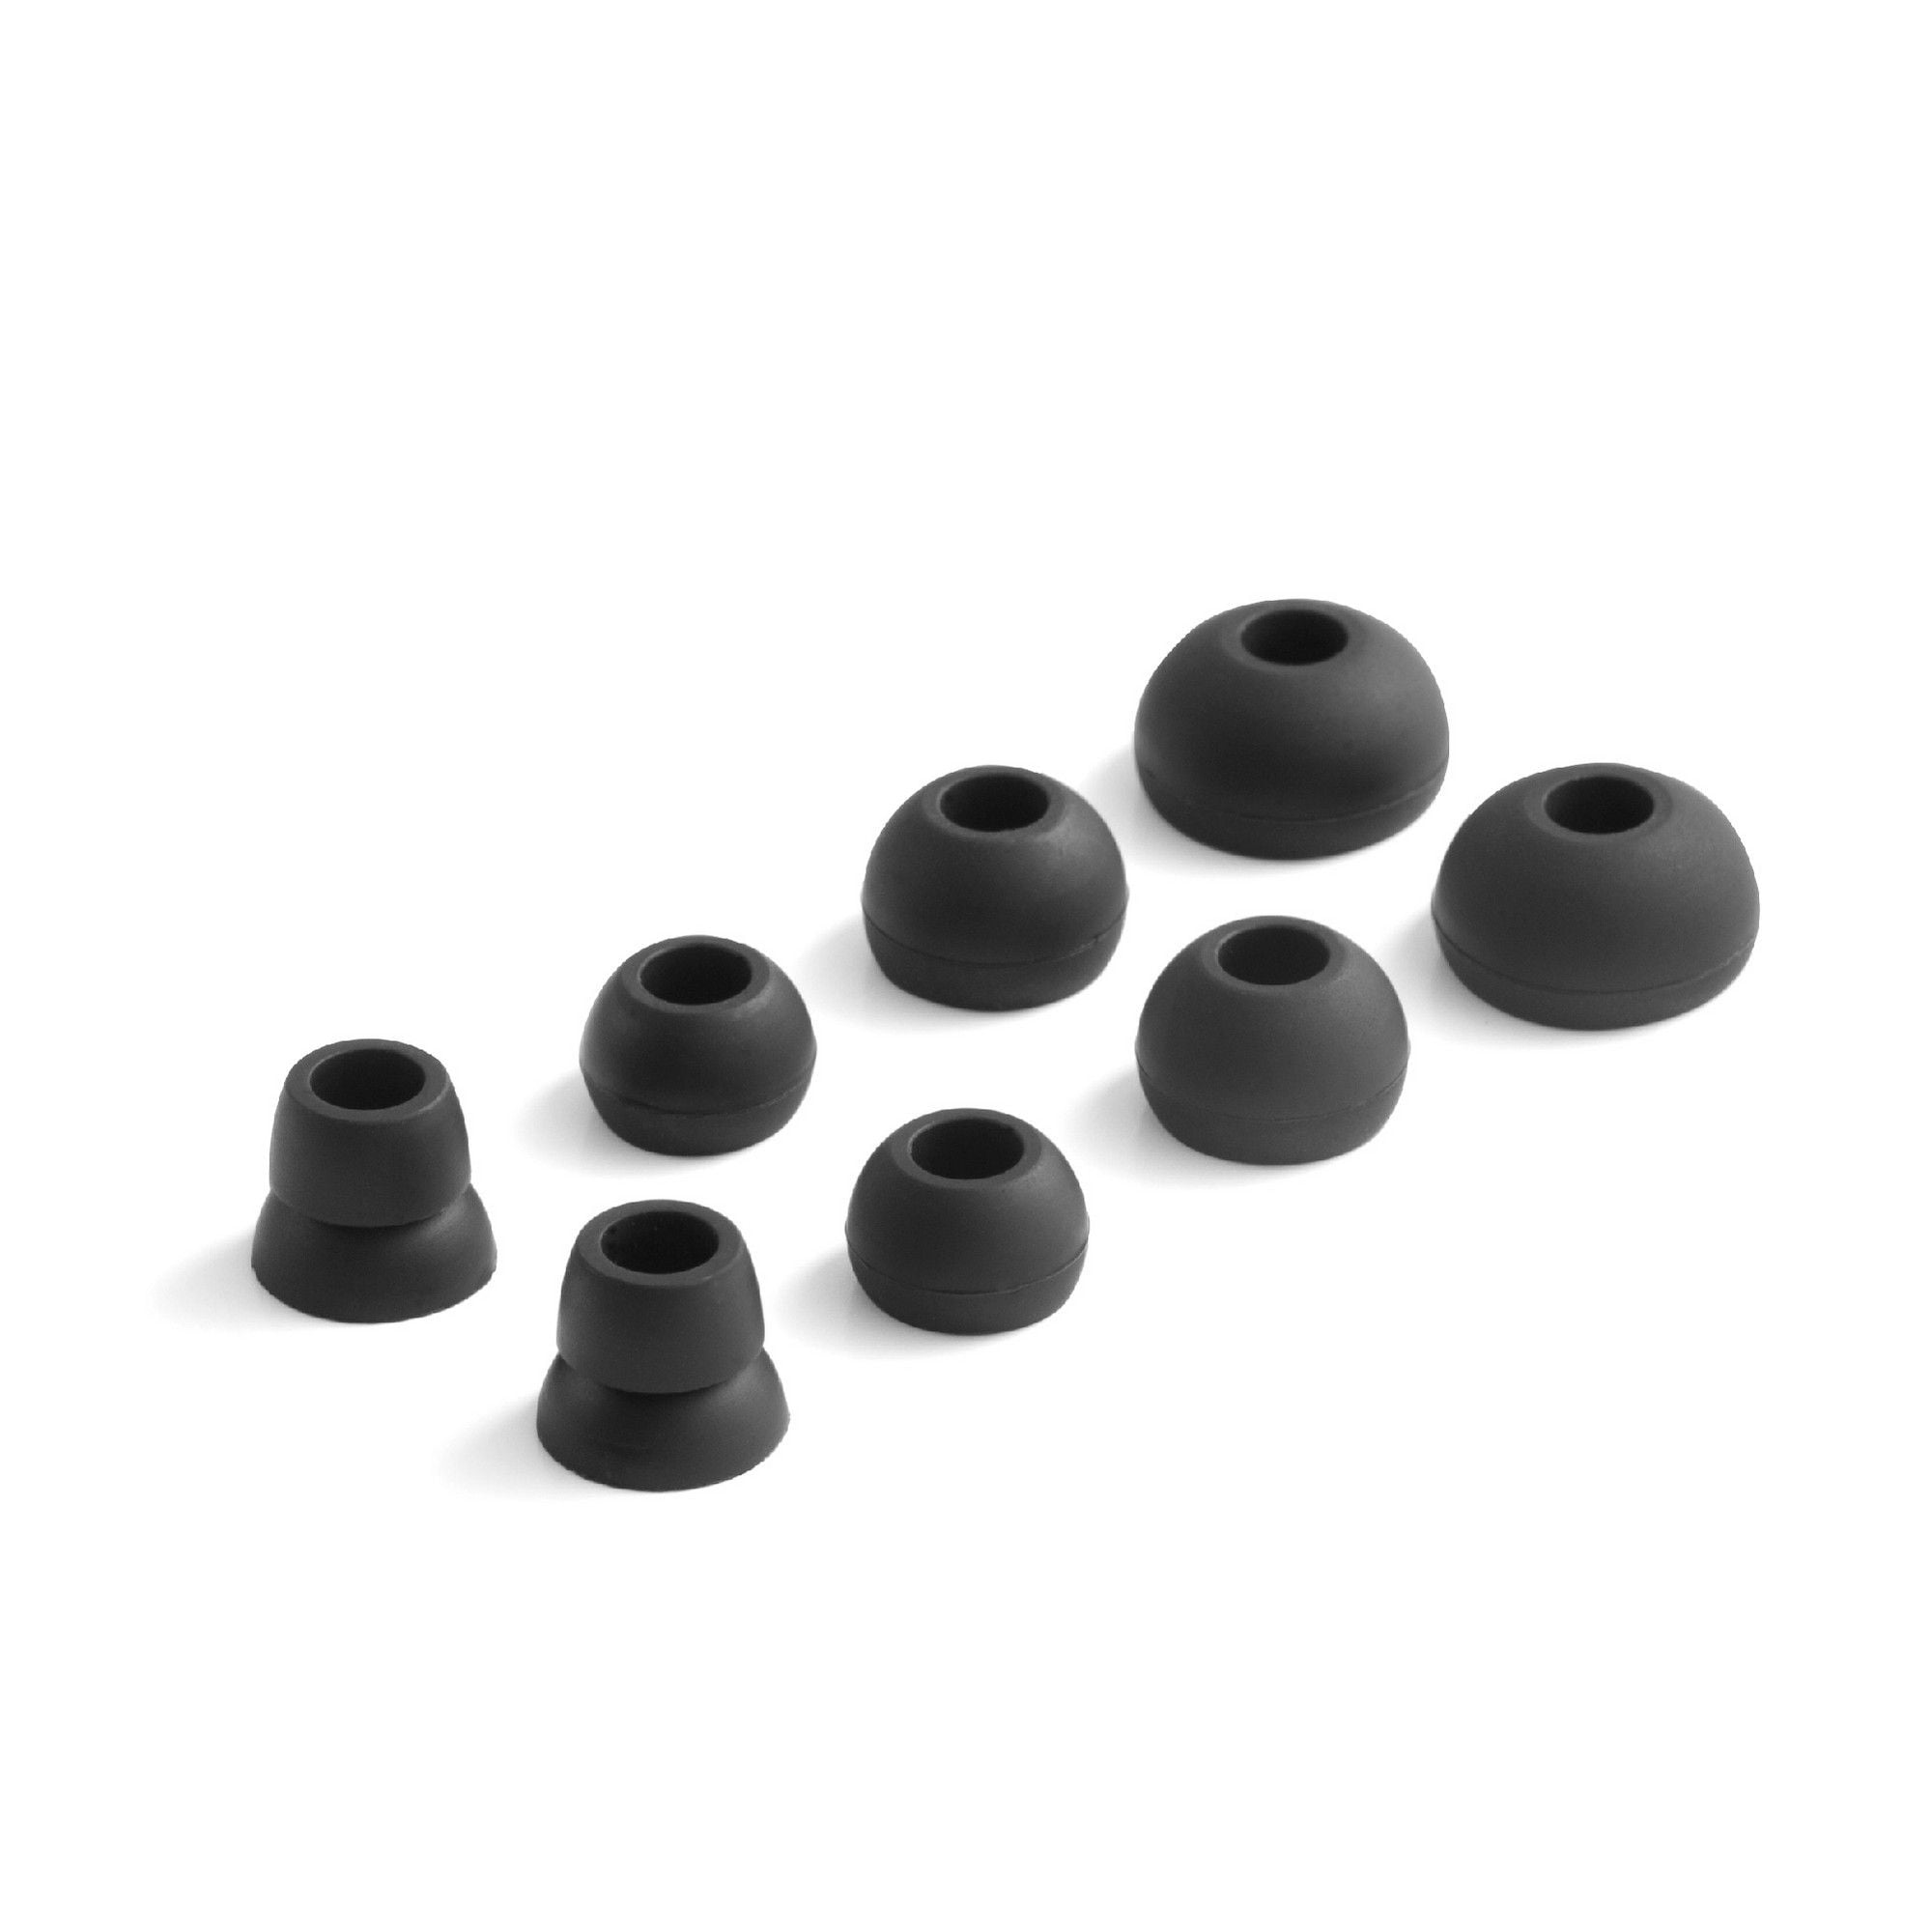 4 Pair Replacement Silicone Ear Tips 